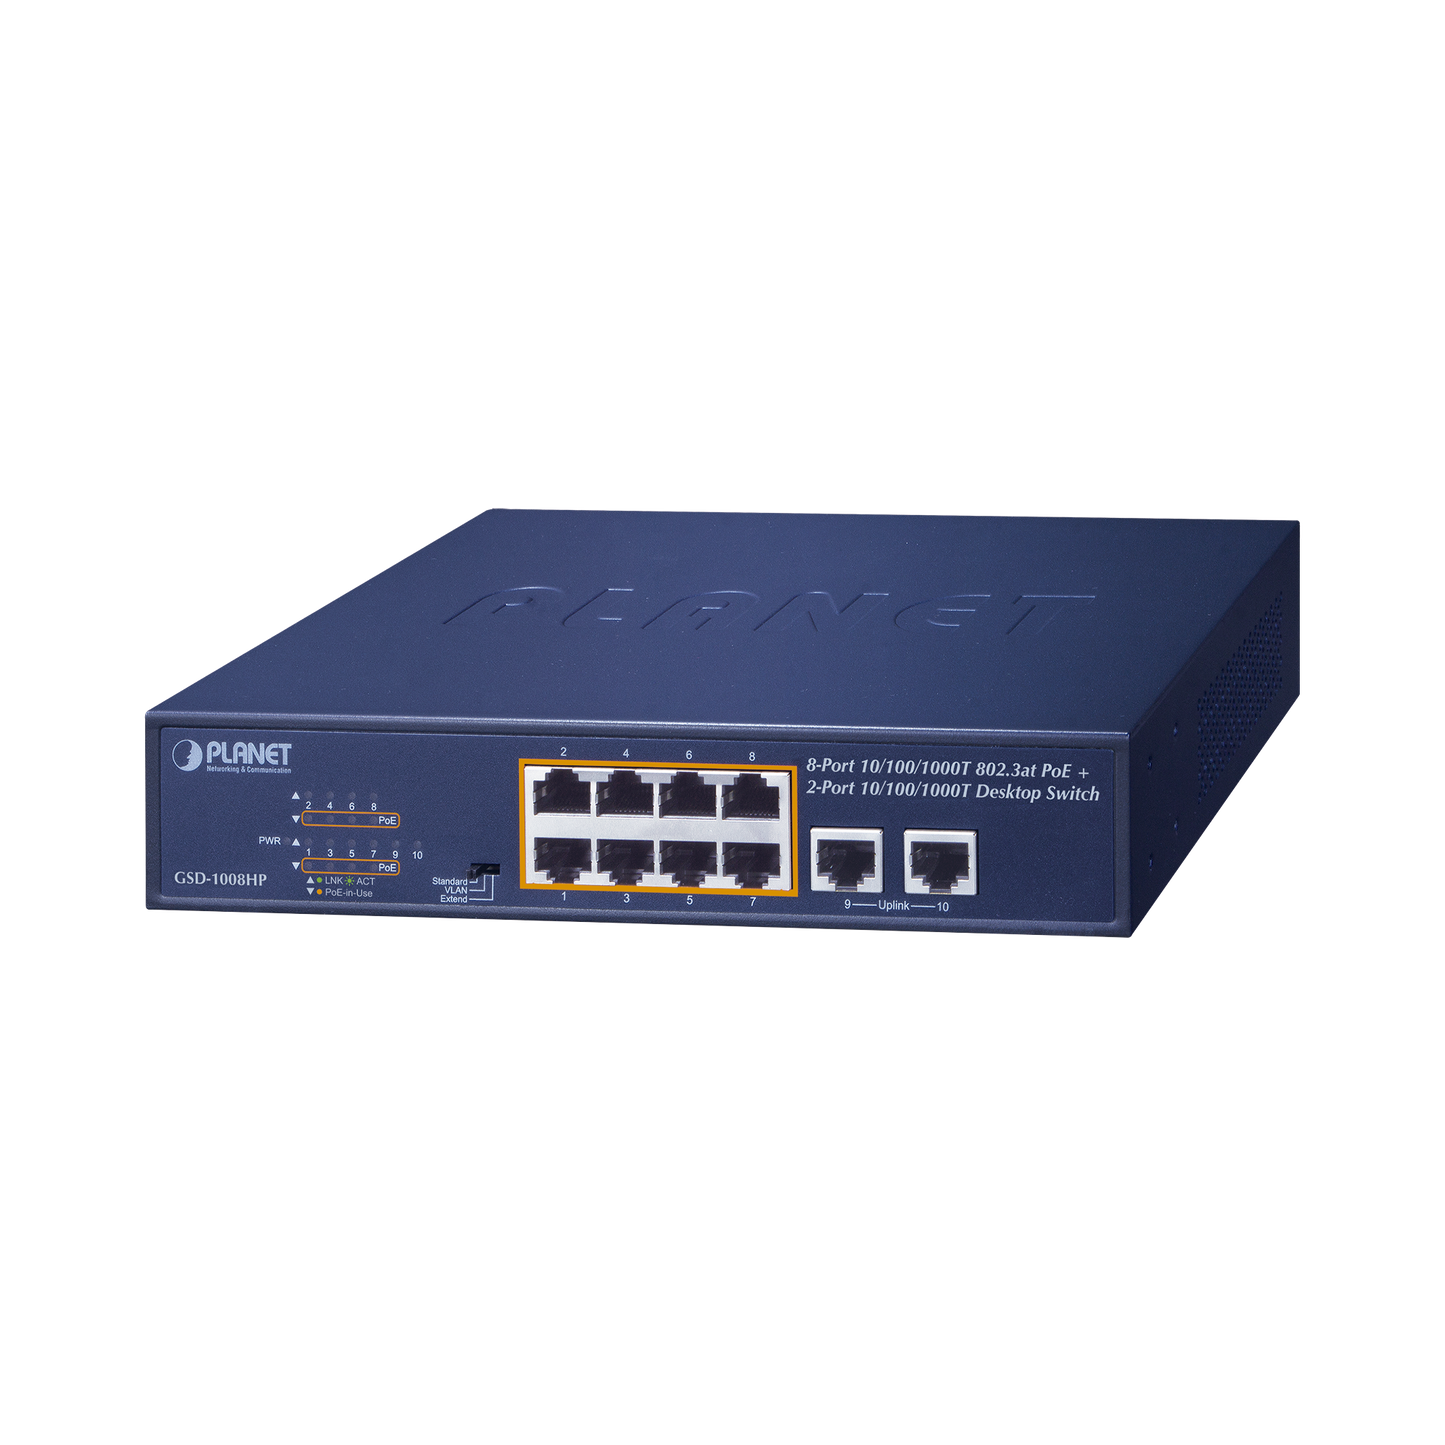 Non-manageable PoE switch with 8 ports 10/100/1000 Mbps with PoE 802.3af / at